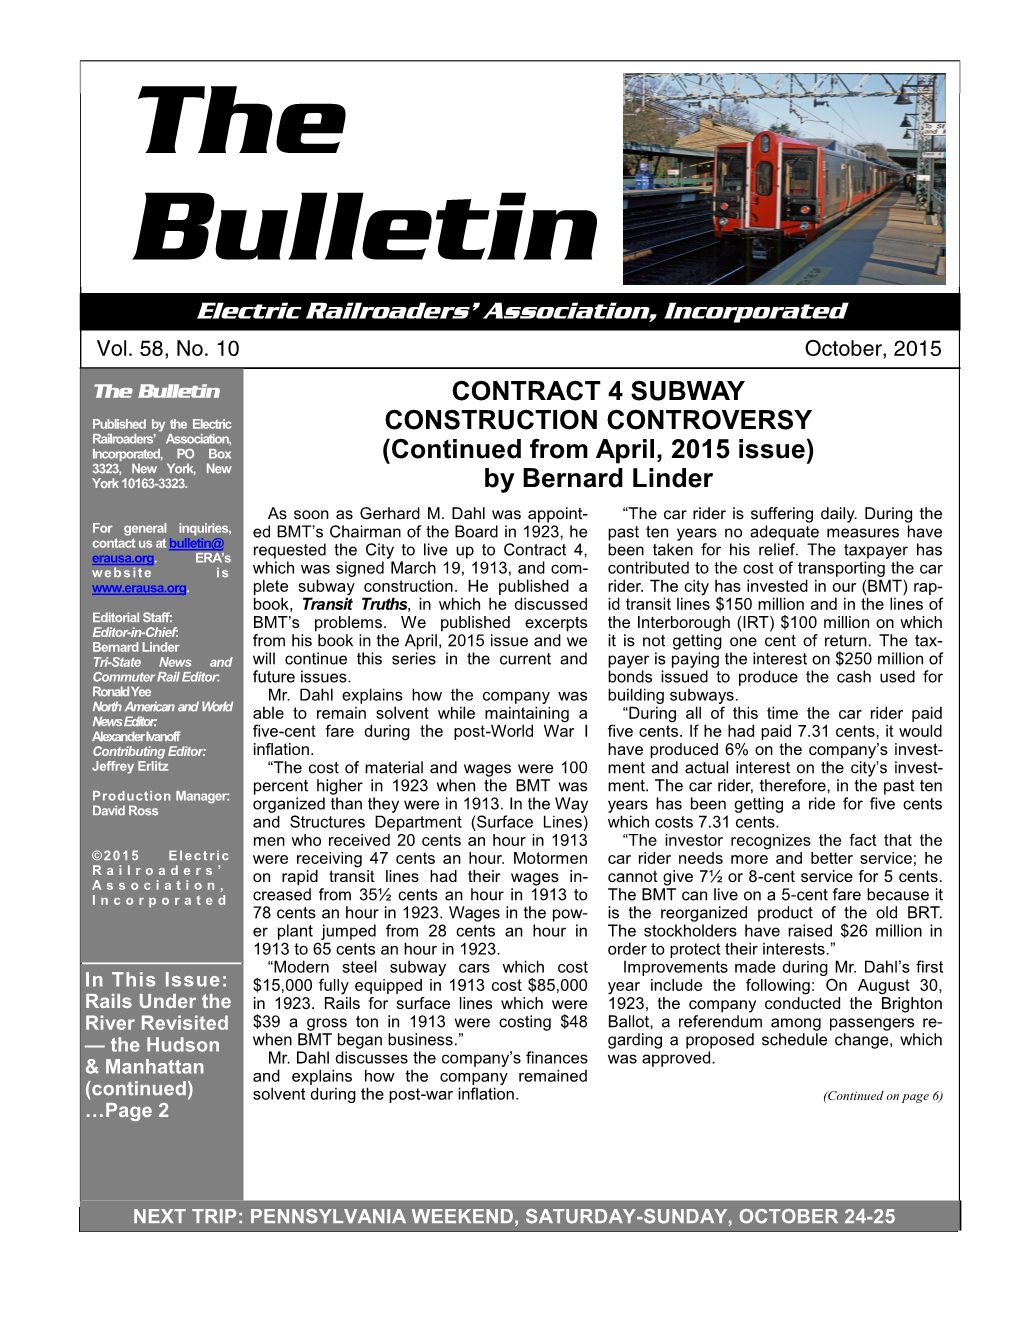 The Bulletin CONTRACT 4 SUBWAY